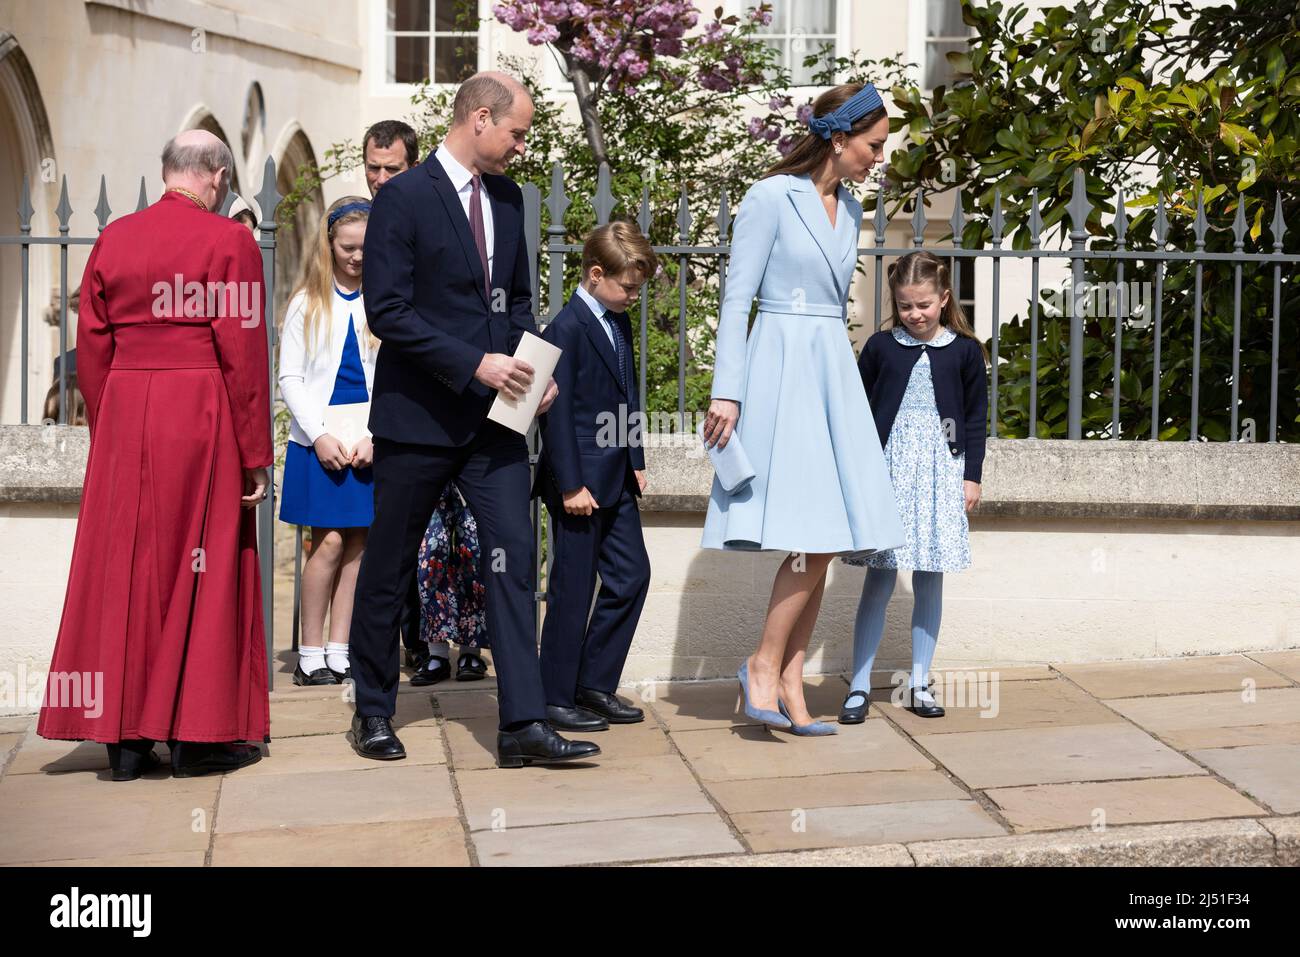 Duke and Duchess of Cambridge with members of the Royal Family attend the Easter Service at St George's Chapel, Windsor Castle, Berkshire, England, UK Stock Photo